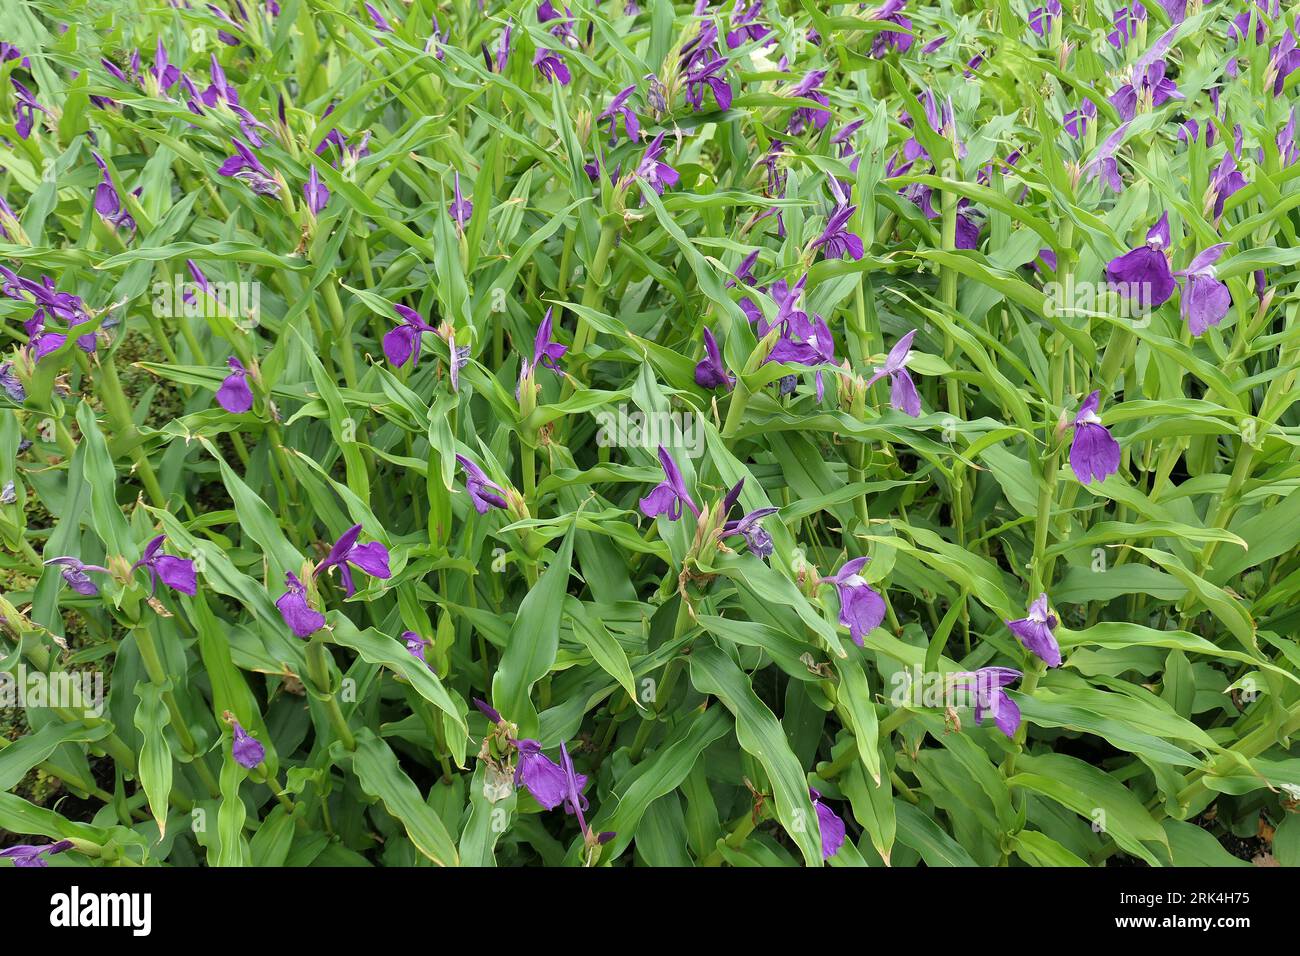 Closeup of the orchid-like bright purple flowers and lance-shaped leaves of the tuberous perennial semi-shade loving garden plant roscoea auriculata. Stock Photo